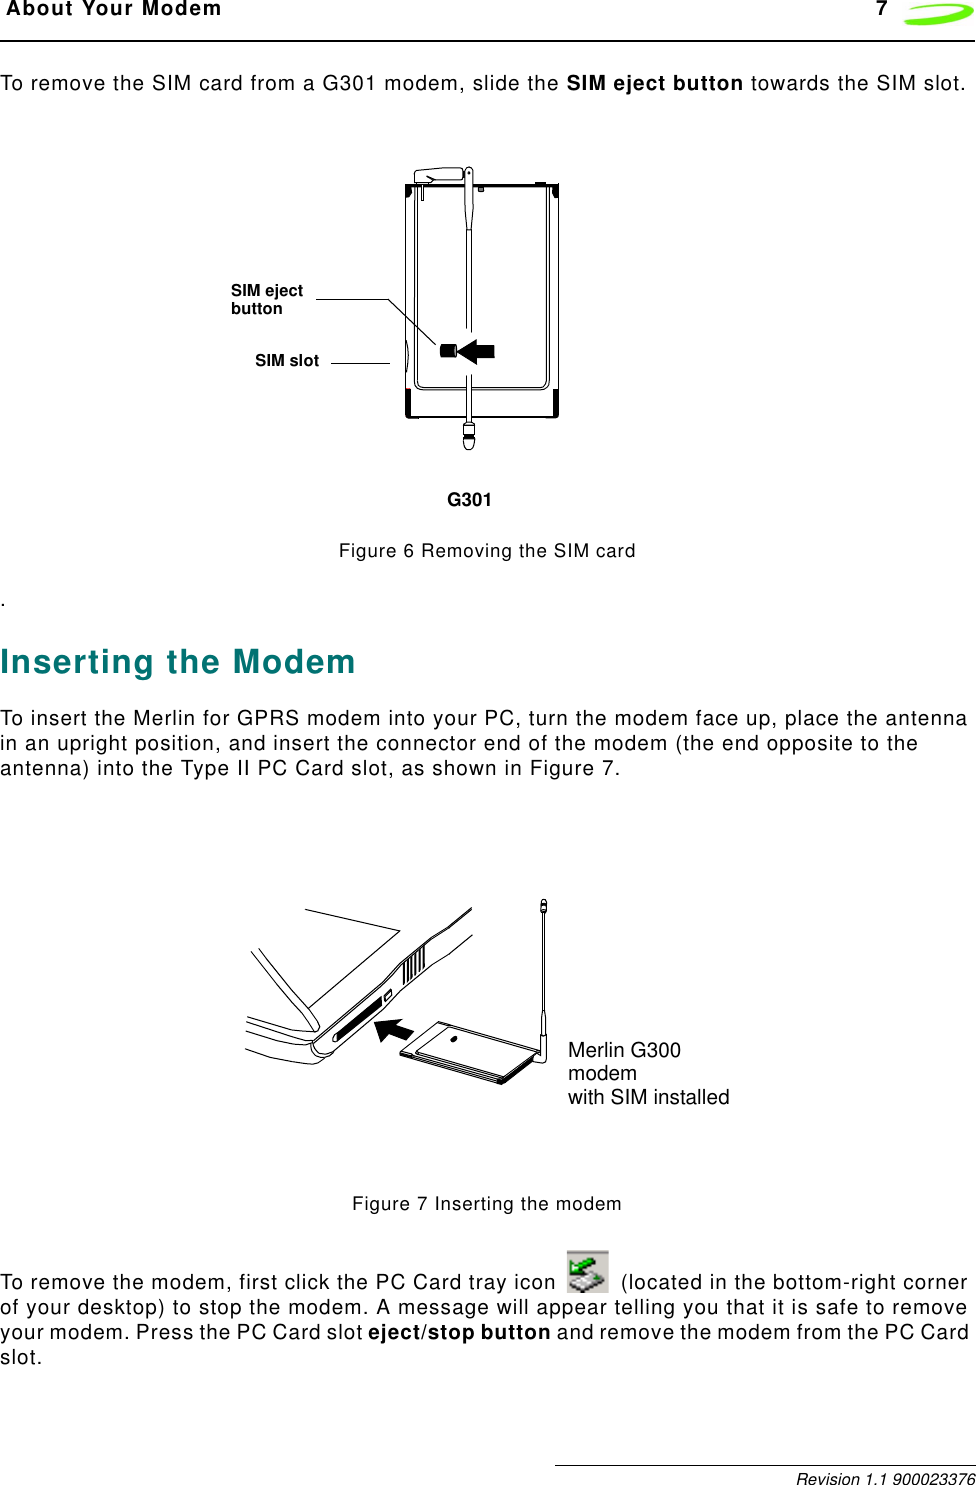  About Your Modem 7 Revision 1.1 900023376To remove the SIM card from a G301 modem, slide the SIM eject button towards the SIM slot. Figure 6 Removing the SIM card.Inserting the ModemTo insert the Merlin for GPRS modem into your PC, turn the modem face up, place the antenna in an upright position, and insert the connector end of the modem (the end opposite to the antenna) into the Type II PC Card slot, as shown in Figure 7.Figure 7 Inserting the modemTo remove the modem, first click the PC Card tray icon   (located in the bottom-right corner of your desktop) to stop the modem. A message will appear telling you that it is safe to remove your modem. Press the PC Card slot eject/stop button and remove the modem from the PC Card slot.SIM slotSIM ejectbuttonG301Merlin G300modemwith SIM installed